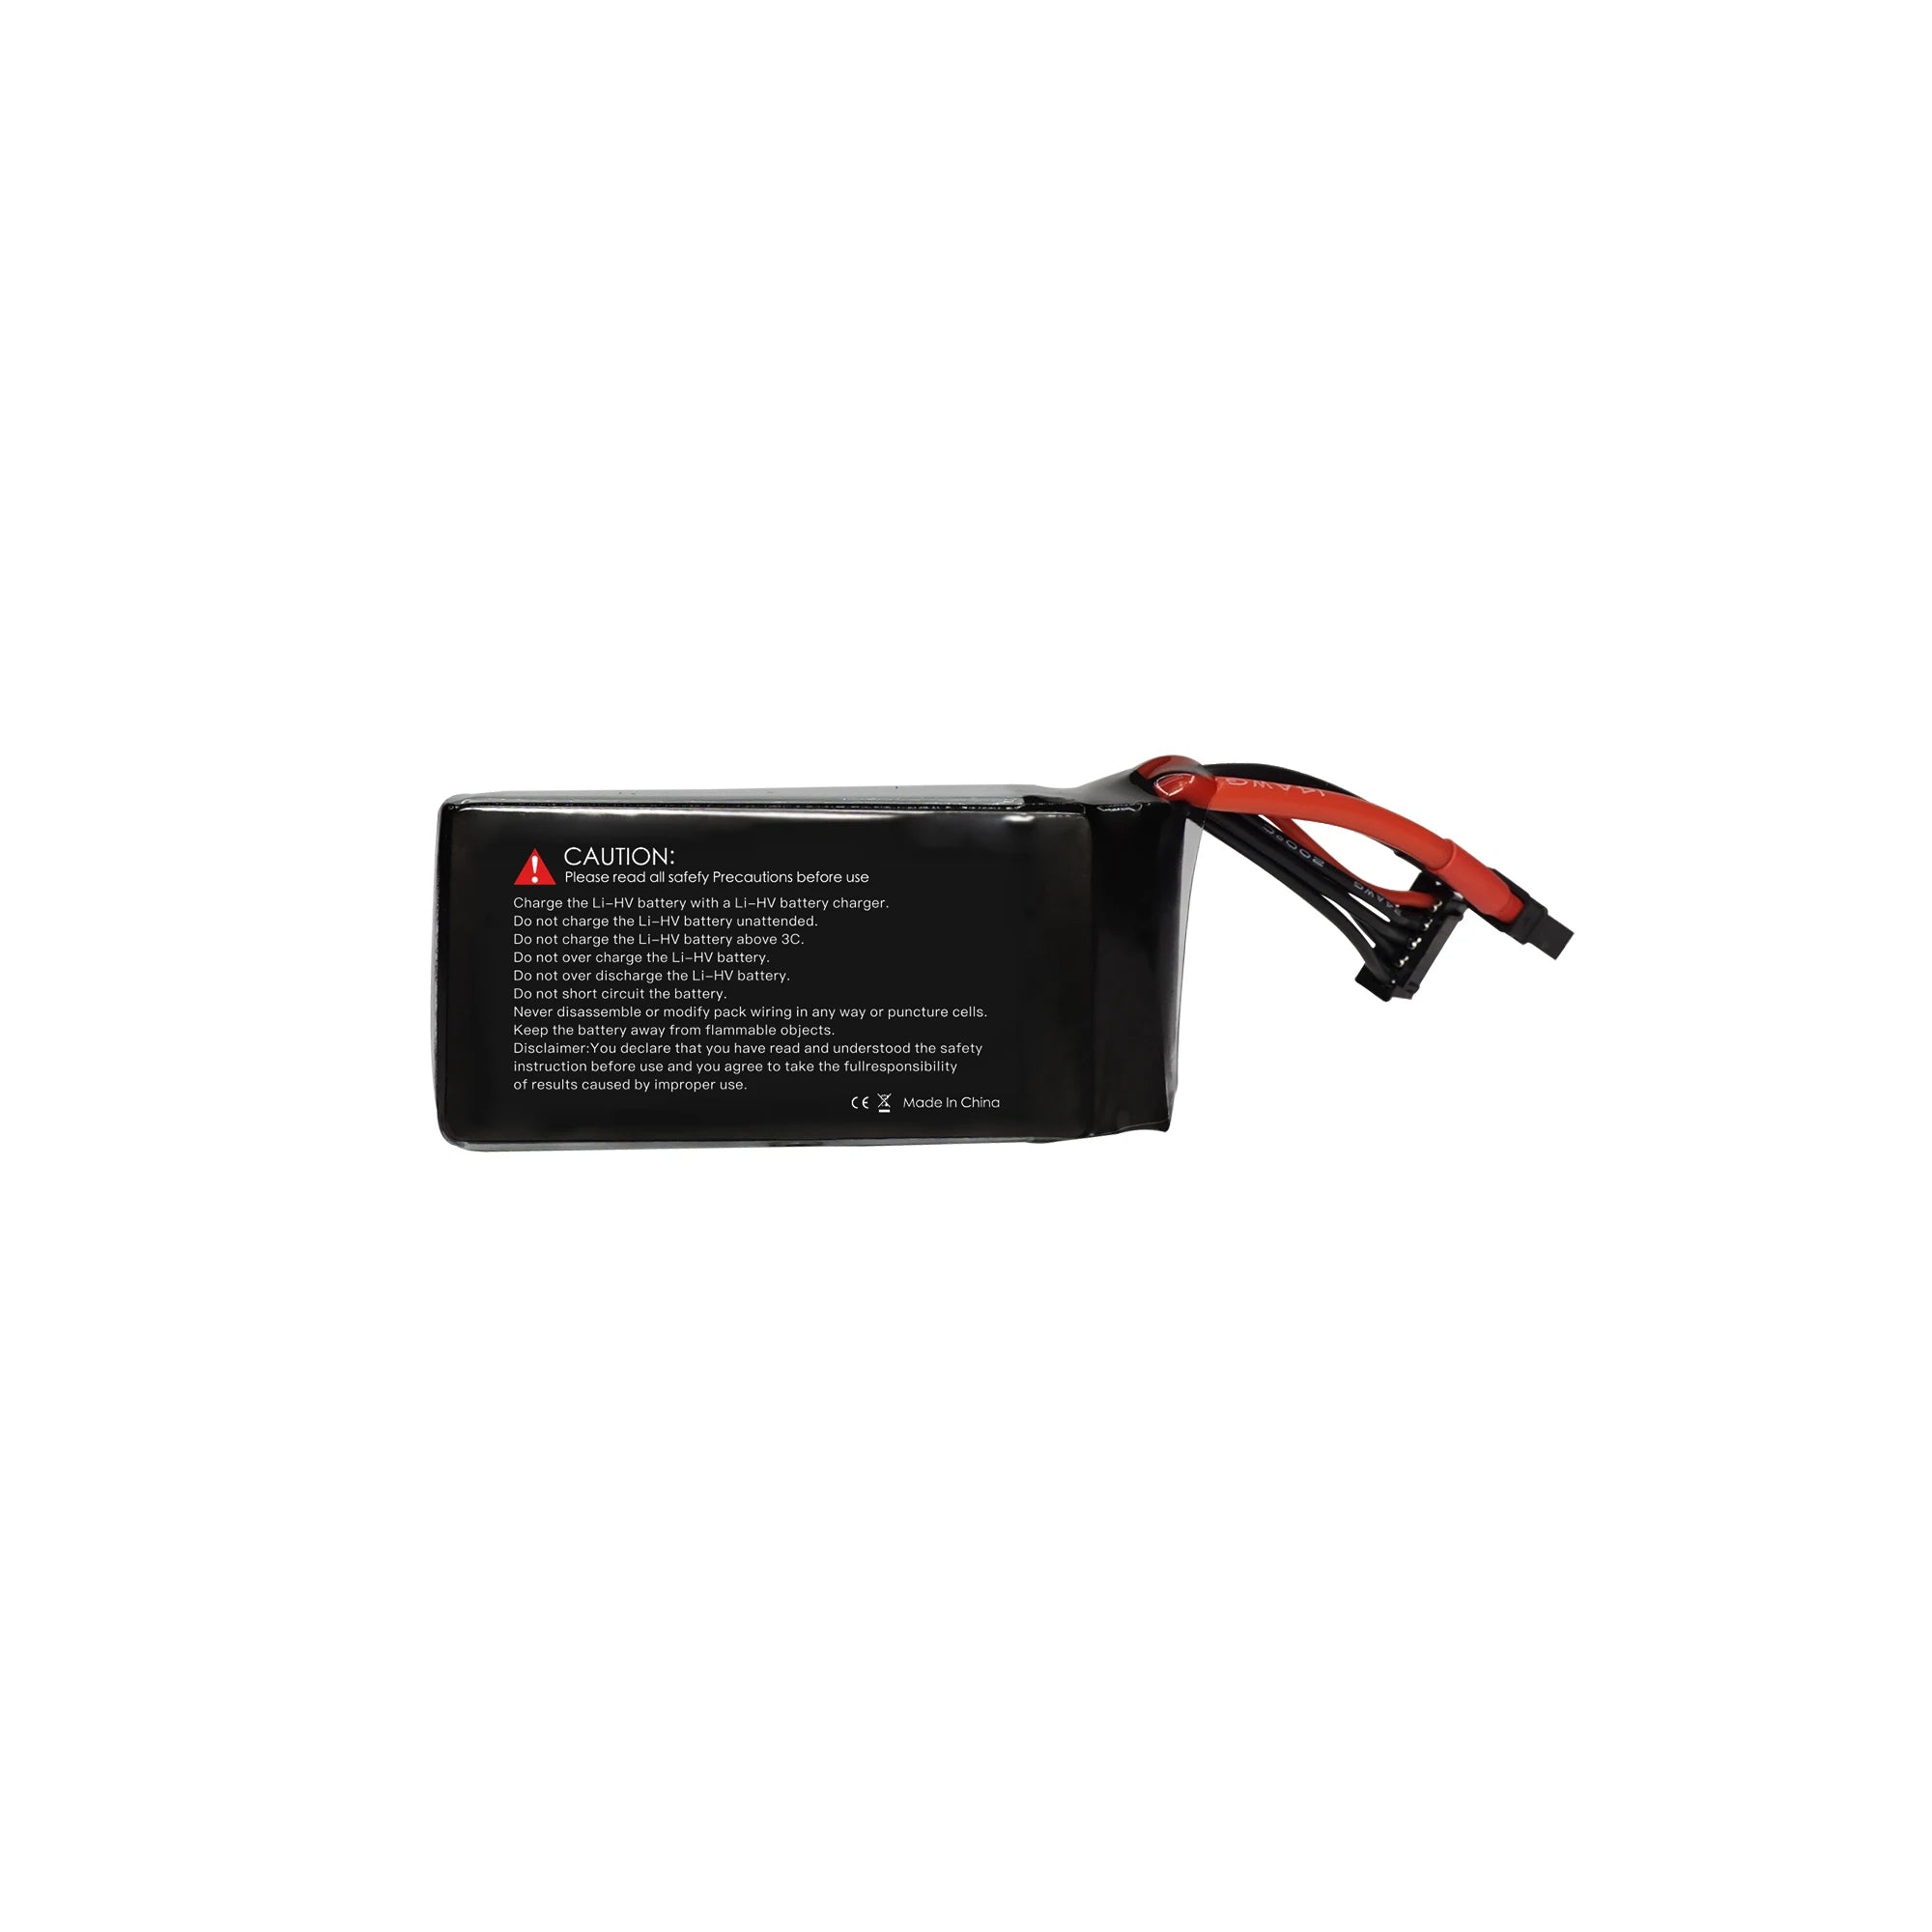 GEPRC 4S 1100mAh 110C LiPo Battery, Do not charge the Li-HV battery unattended: Do not overcharge the Li